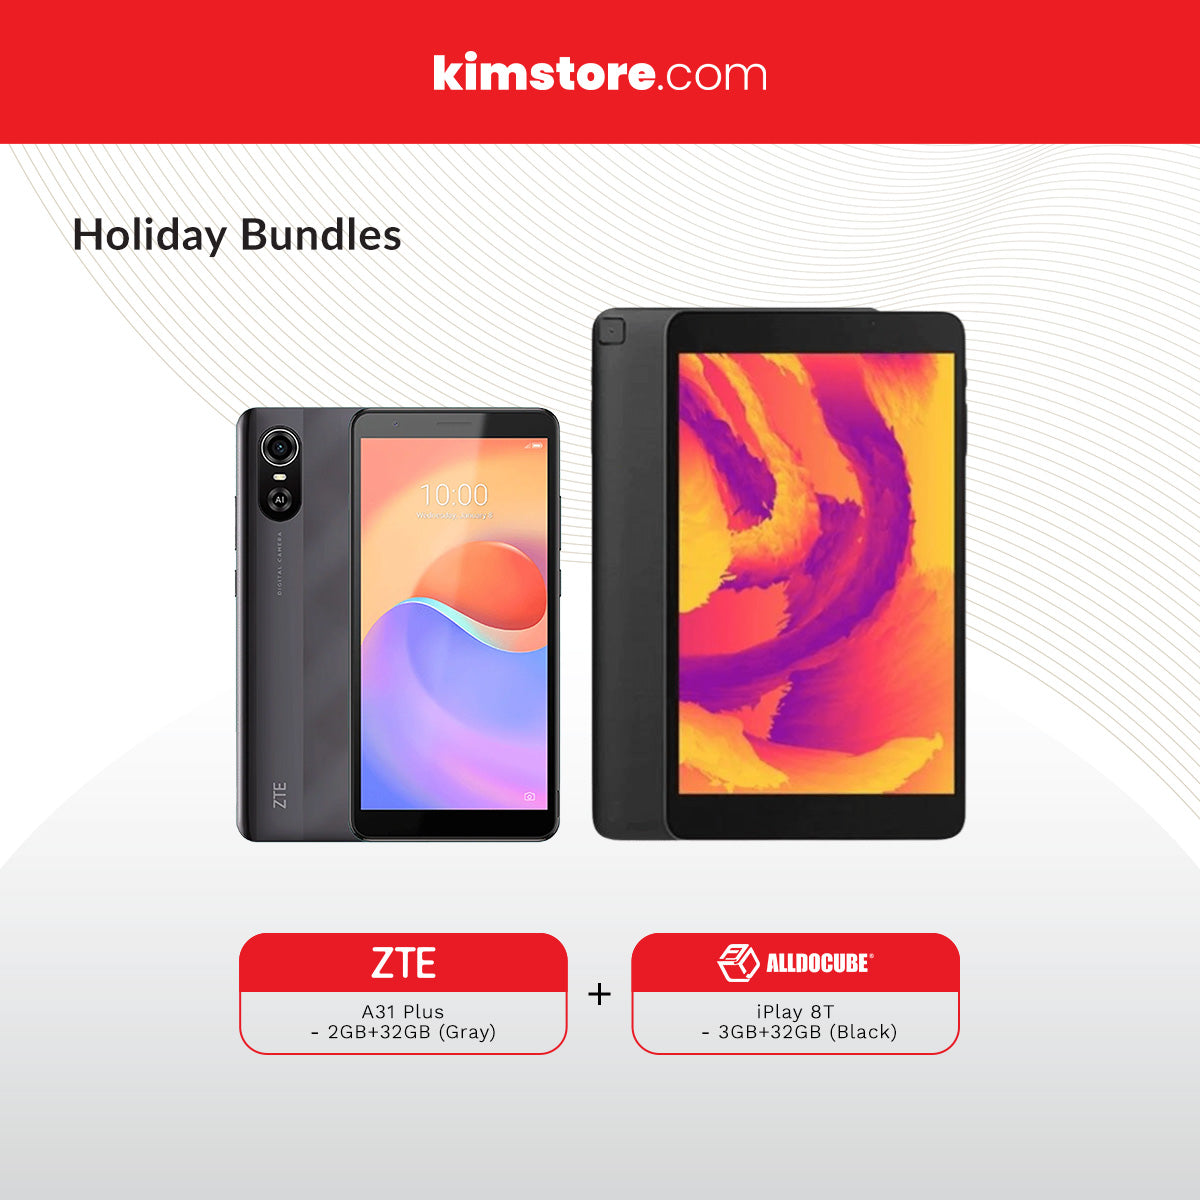 Holiday Bundle: ZTE A31 Plus (2GB/32GB) and Alldocube iPlay 8T T802 3+32GB Tablet